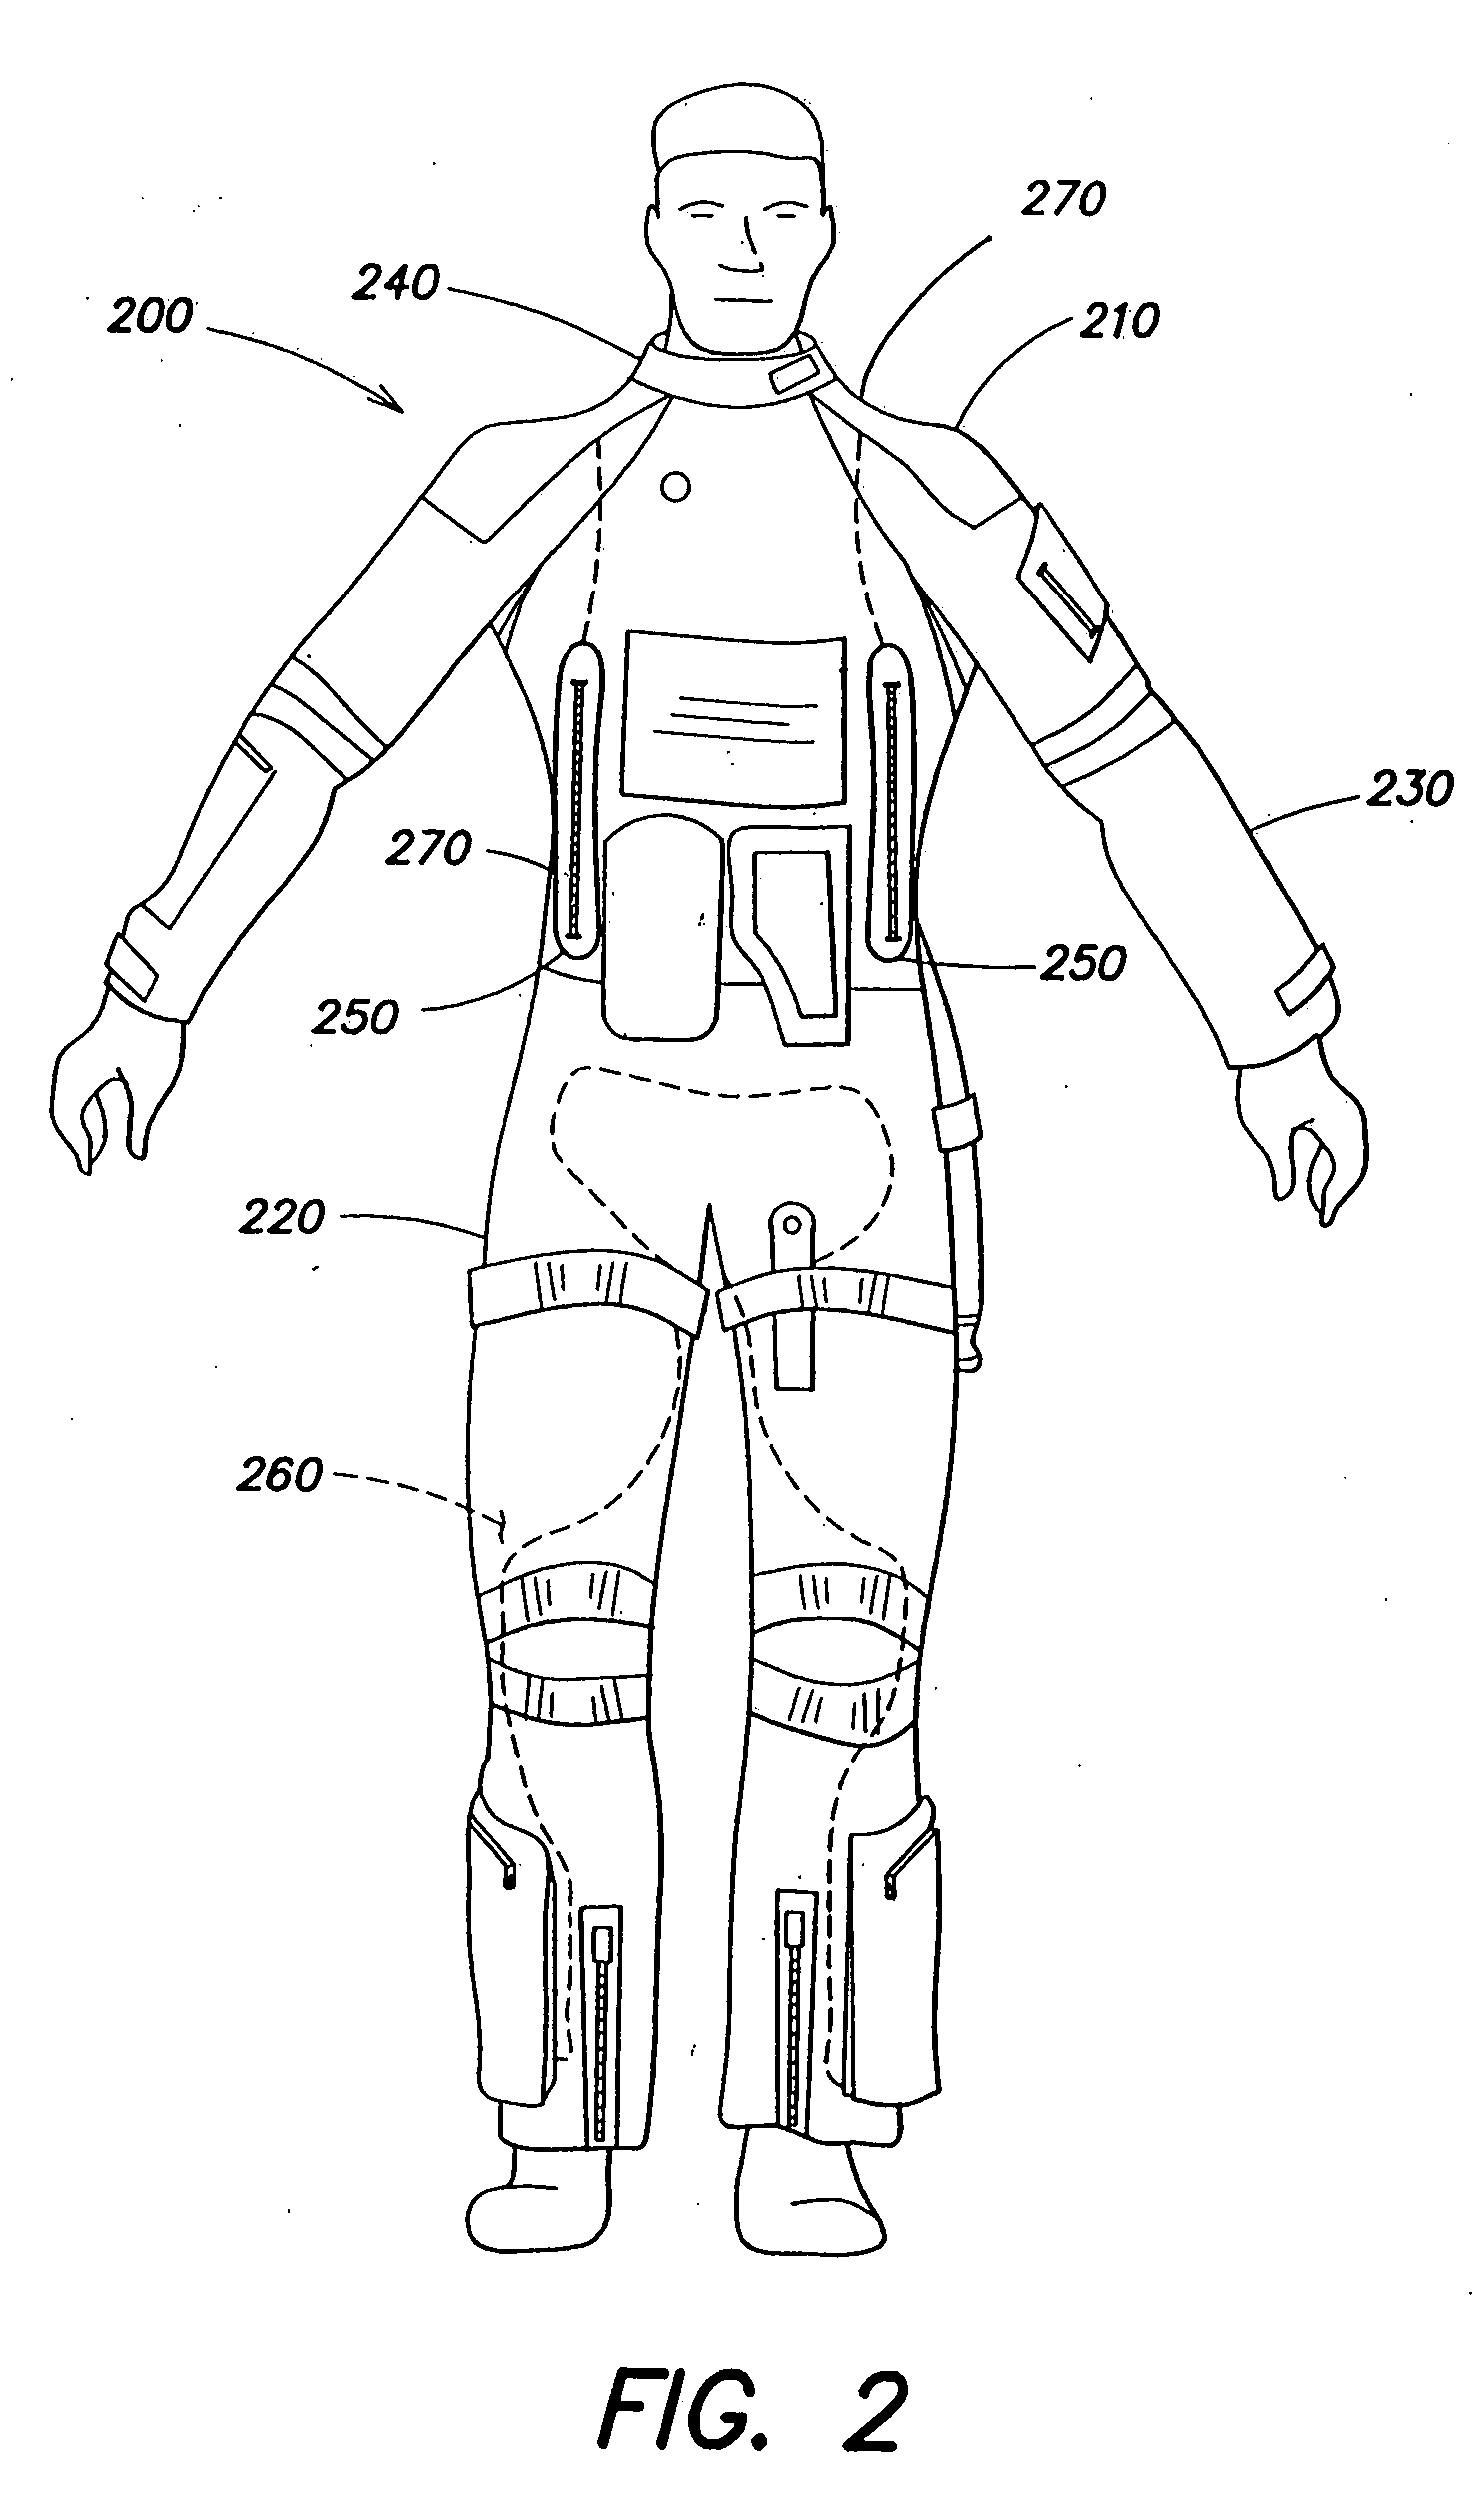 Integrated protective ensemble